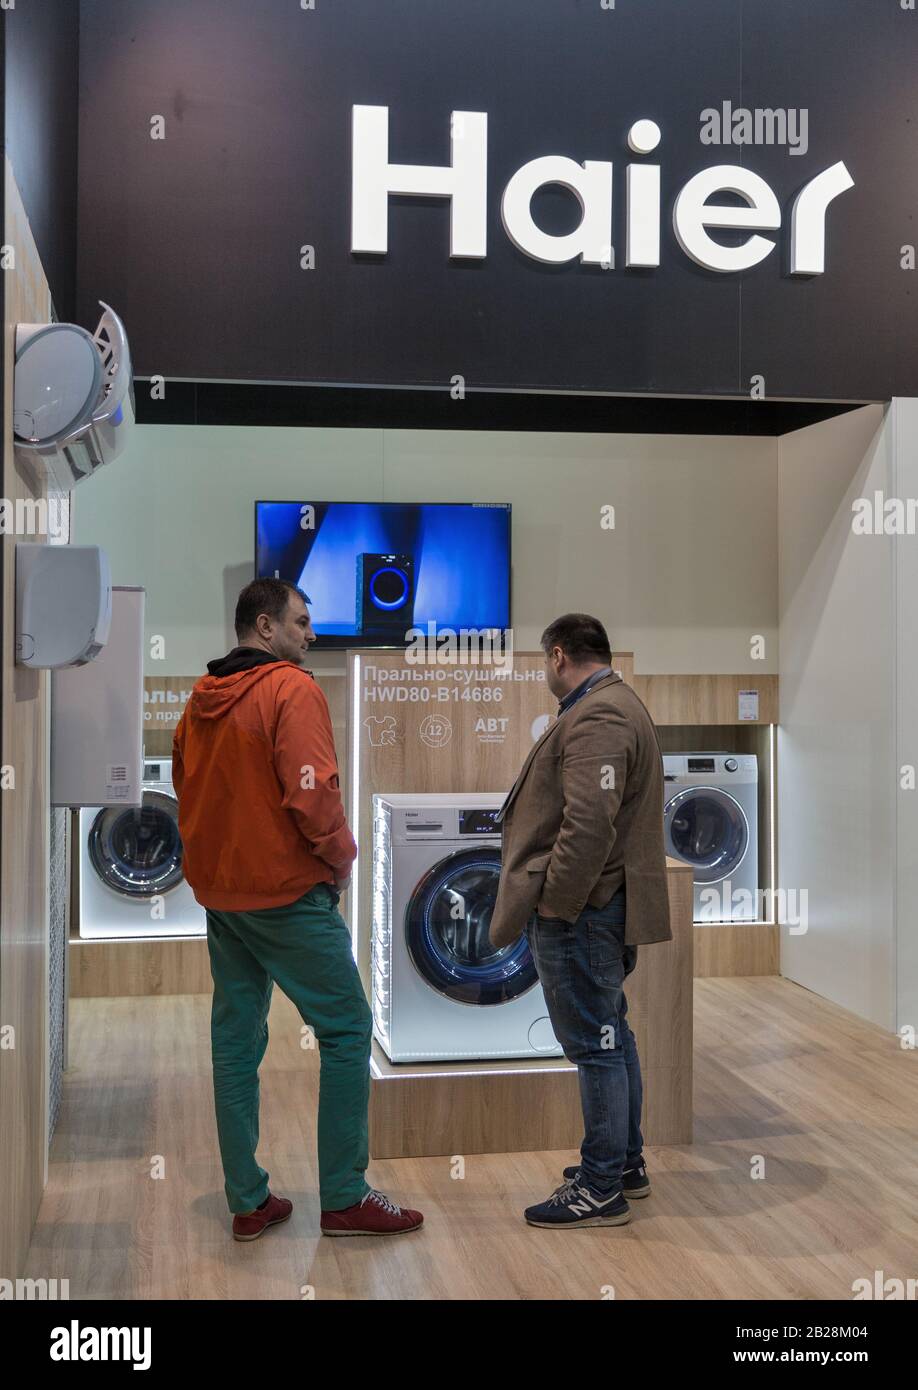 KYIV, UKRAINE - APRIL 13, 2019: People visit Haier booth, a multinational home appliances and consumer electronics company, at CEE 2019, the largest e Stock Photo